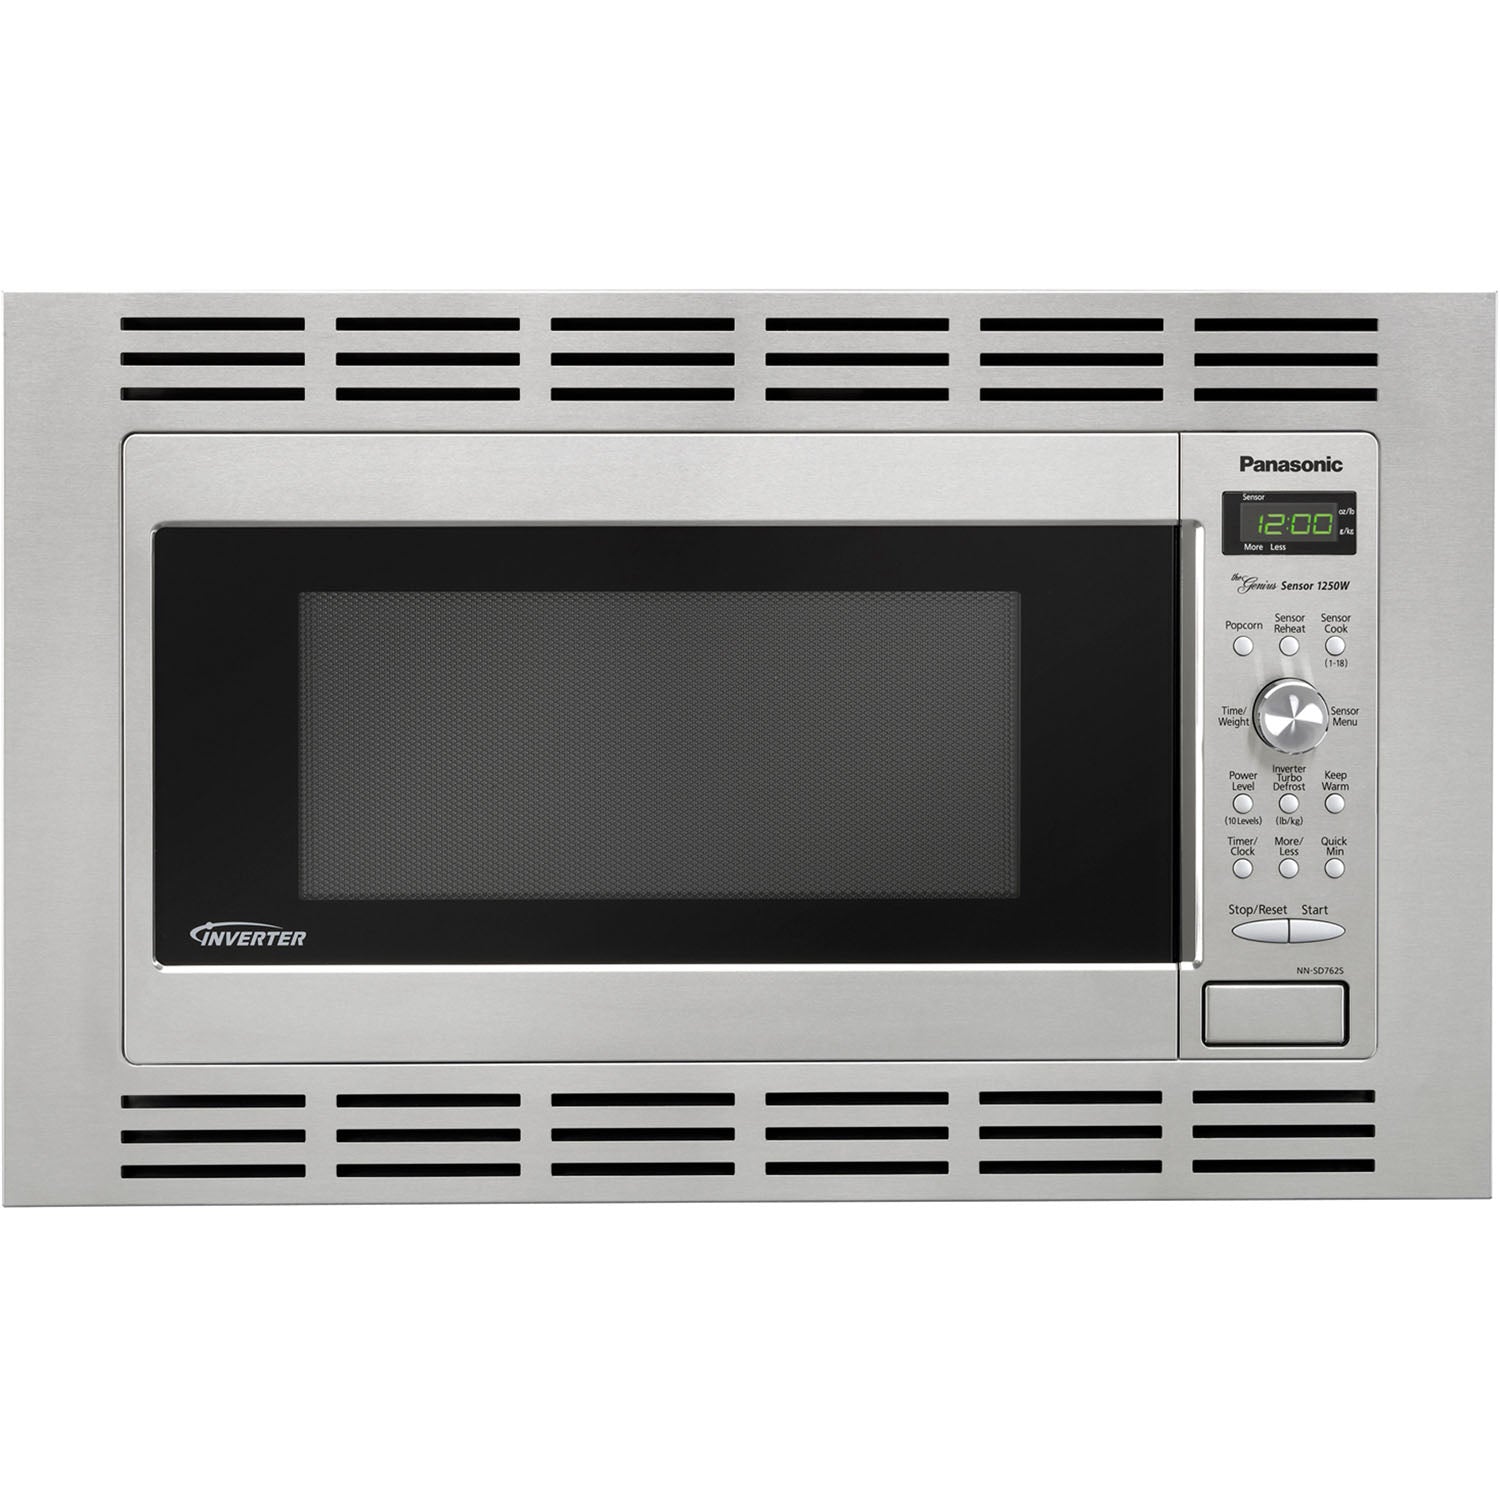 Panasonic Wide Trim Kit for Panasonic's 1.6 cu. ft. Microwave Ovens in Stainless Steel with Size Options (NN-TK7)